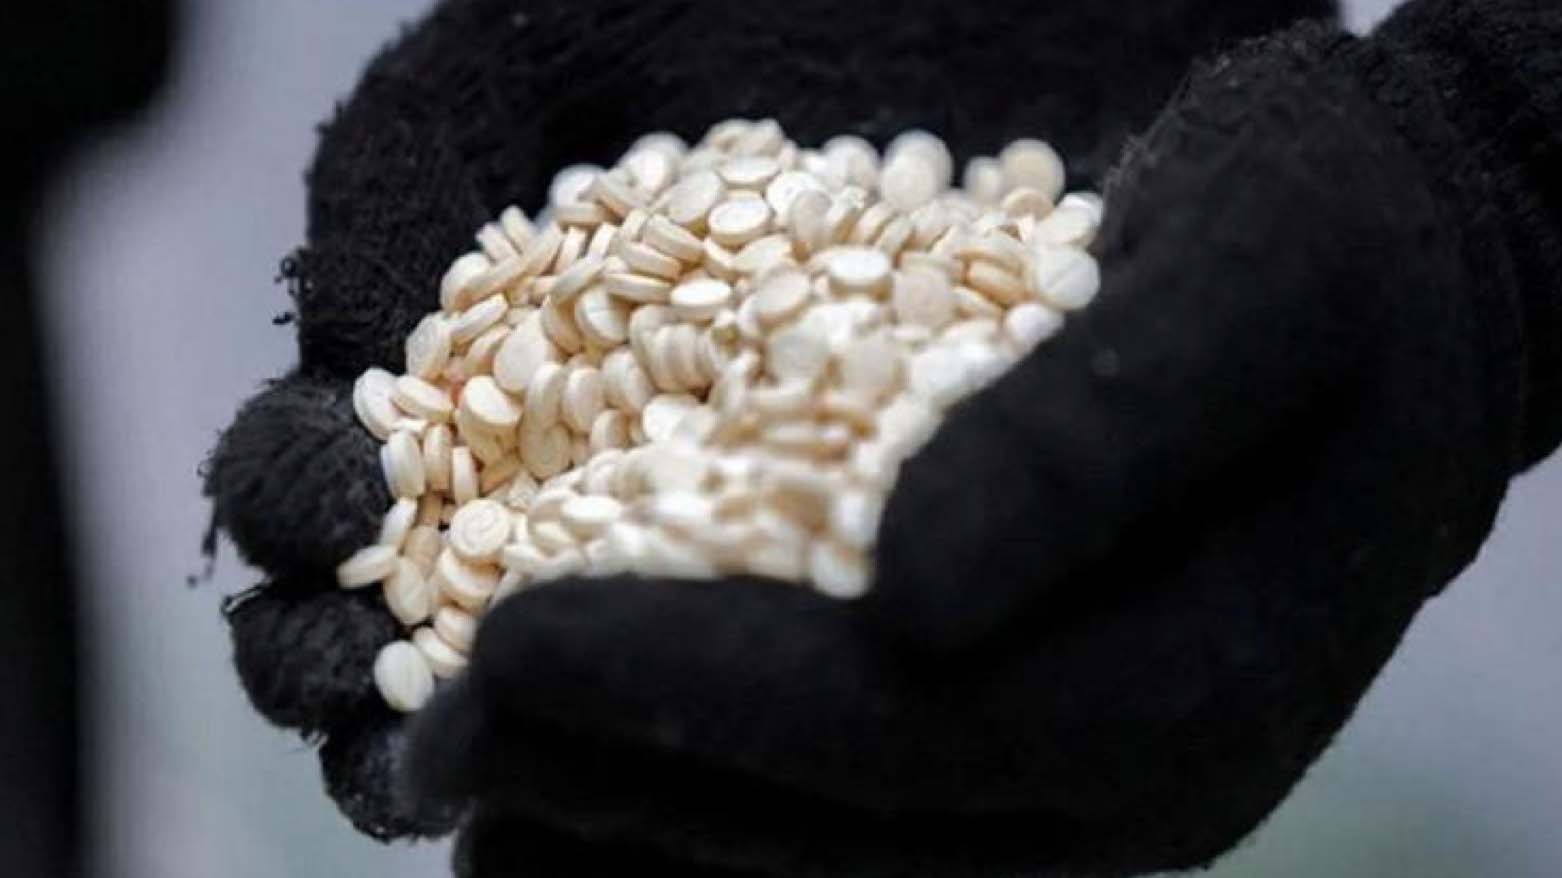 Officer empties a bag of tablets of captagon, drug trafficking convictions can be punishable by the death penalty in Iraq (Photo: AFP)